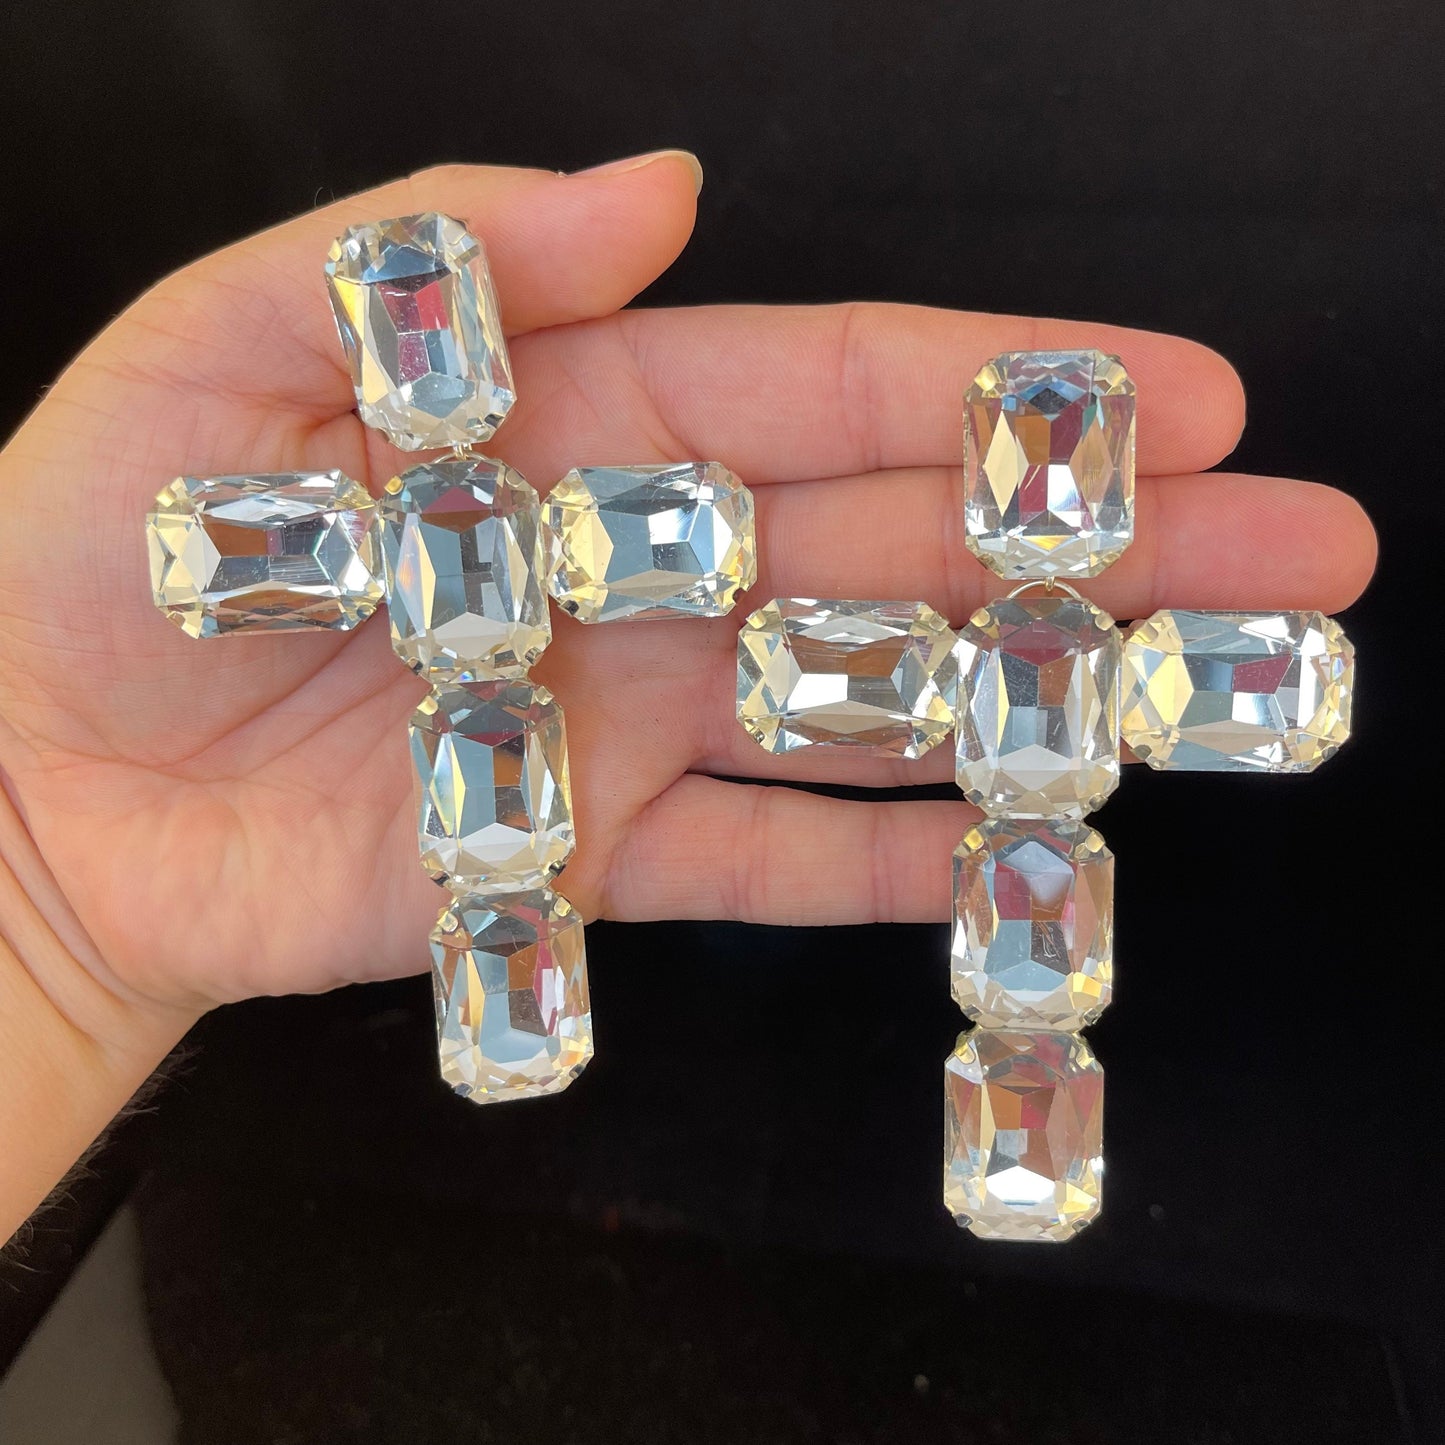 Crystal Cross Earrings / Long Sparkling Clip on or Pierced / Gift / Drag Queen Jewelry / Costume Jewellery